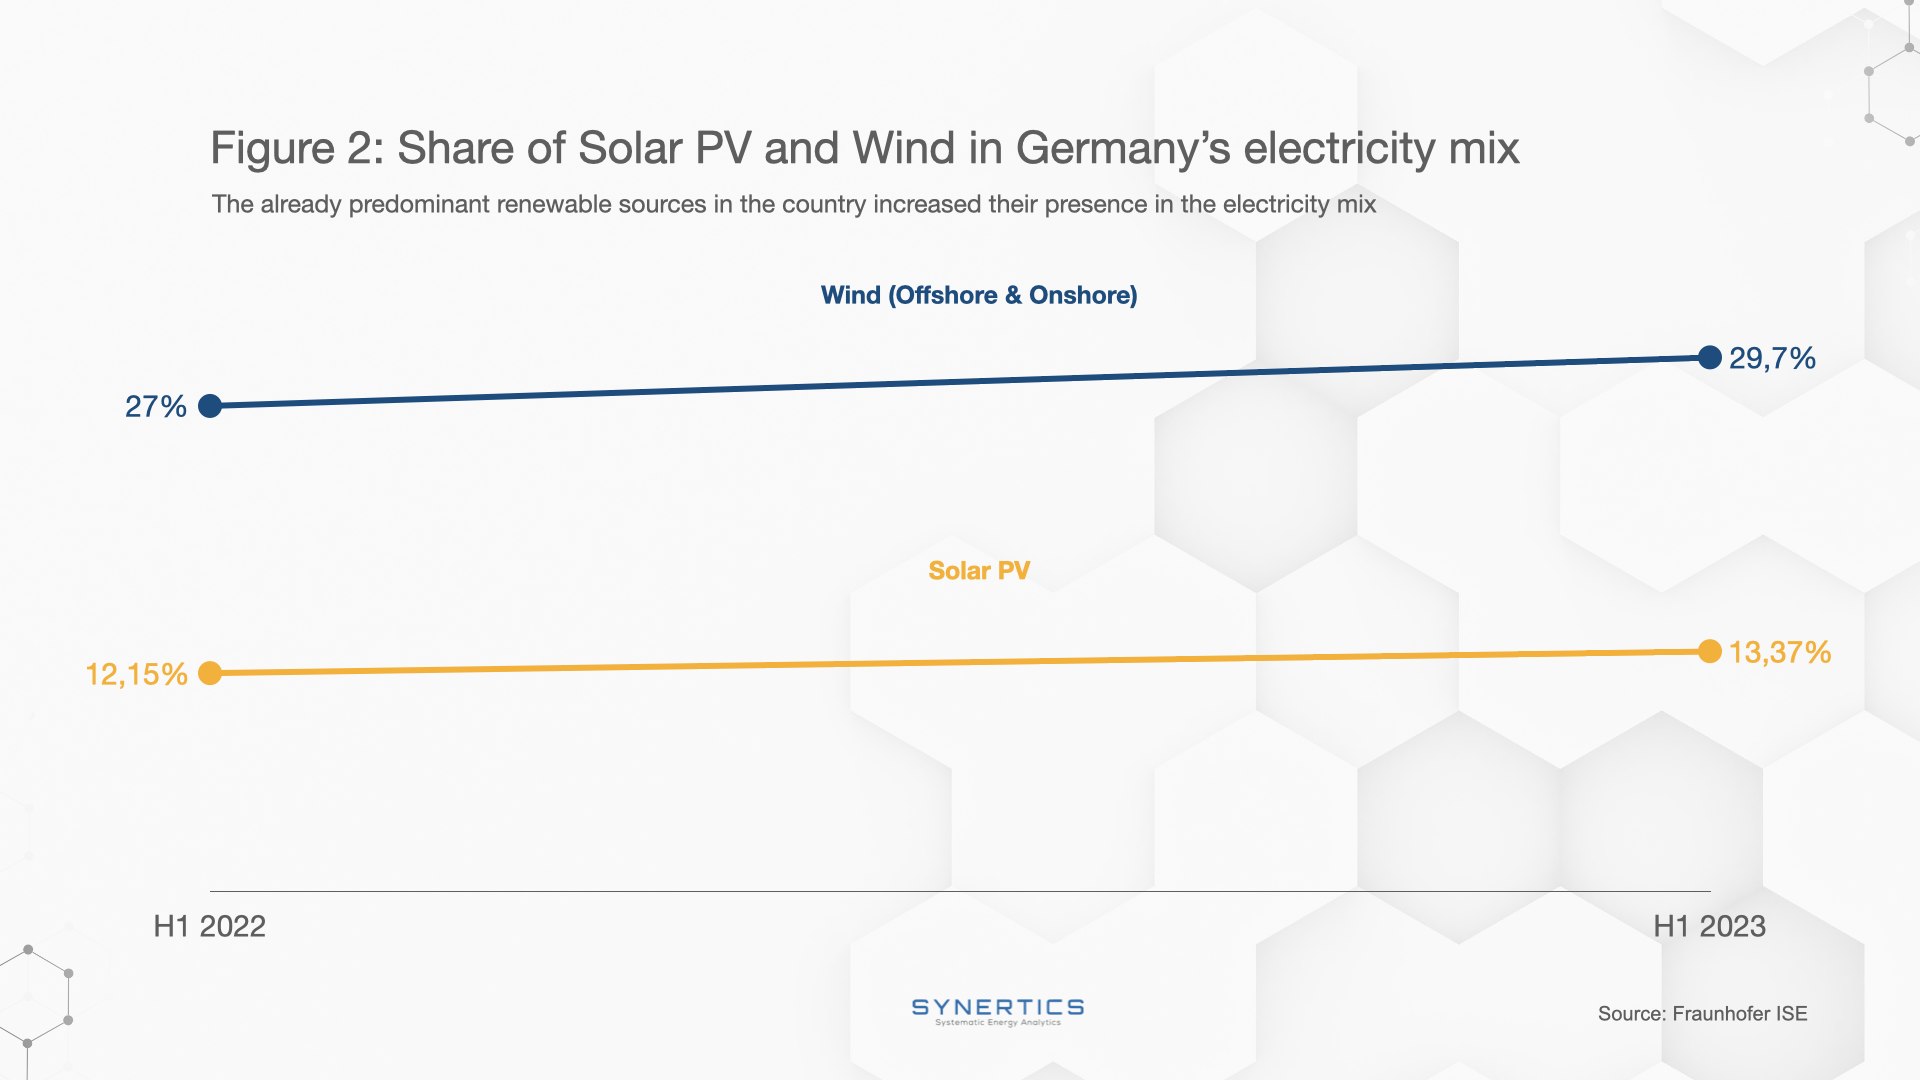 Share of Solar PV and Wind in Germany's electricity mix